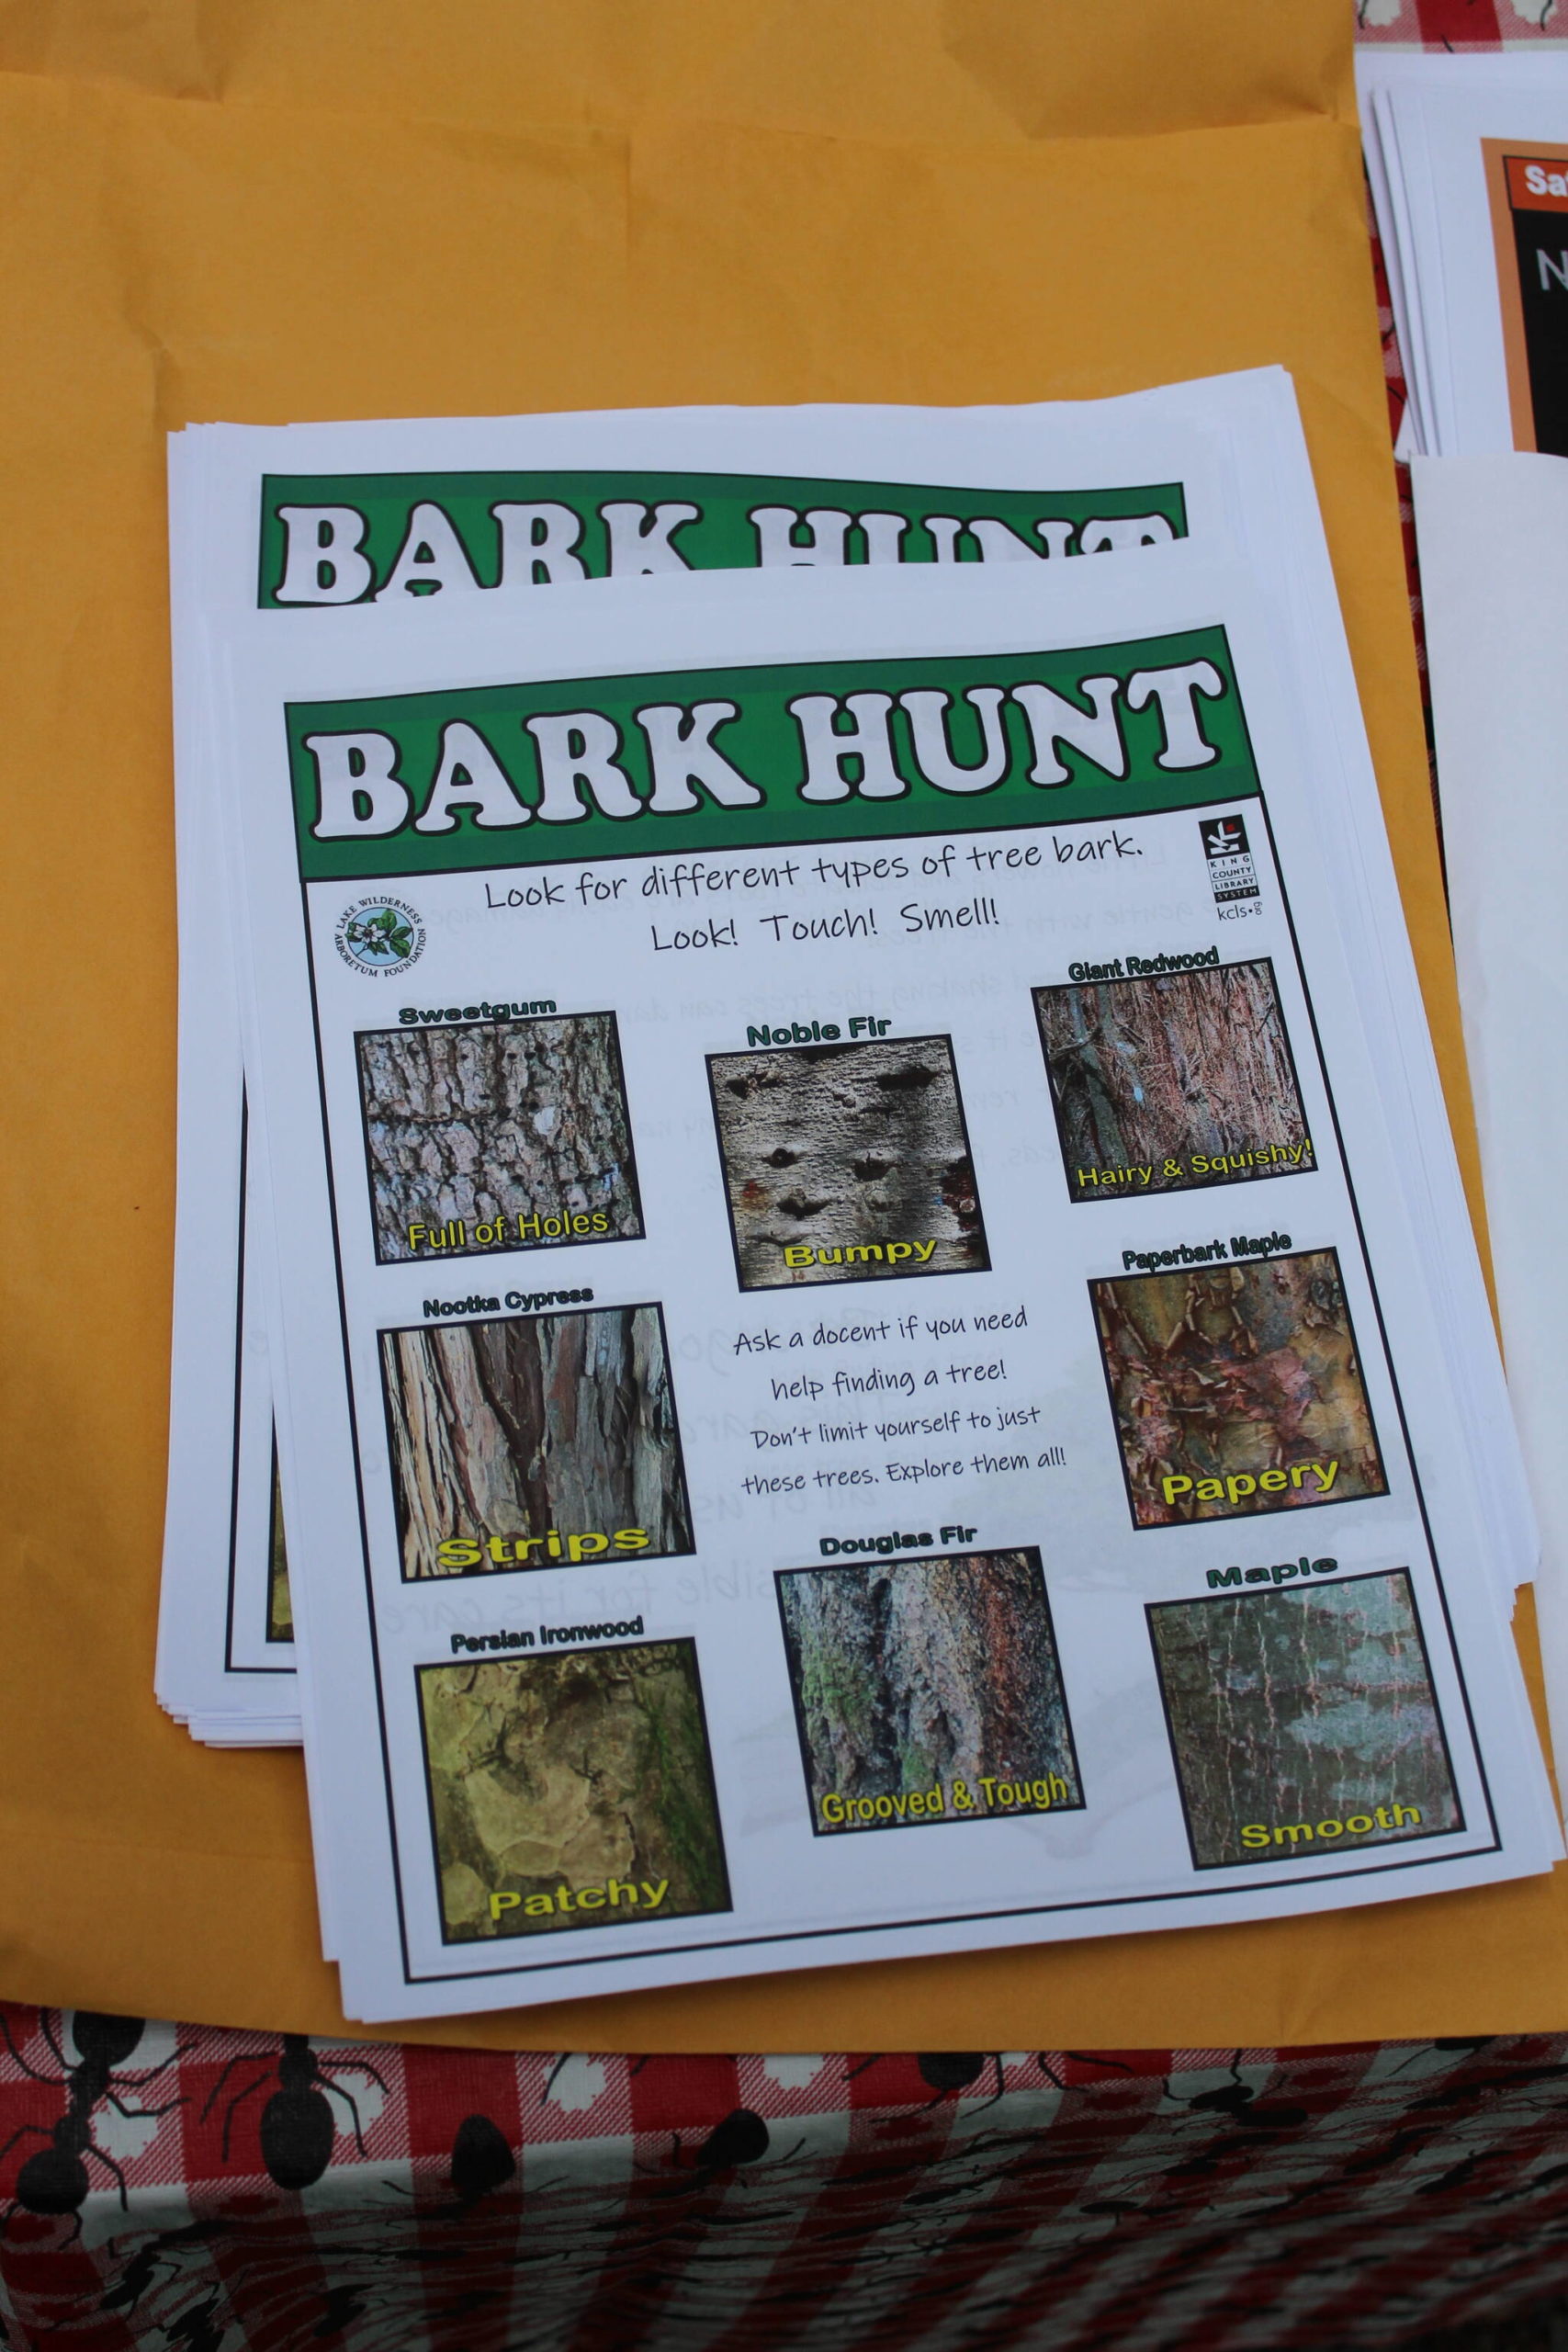 Children were given Bark Hunt flyers to help identify and experience the different bark in the Lake Wilderness Arboretum. Photo by Bailey Jo Josie/Sound Publishing.